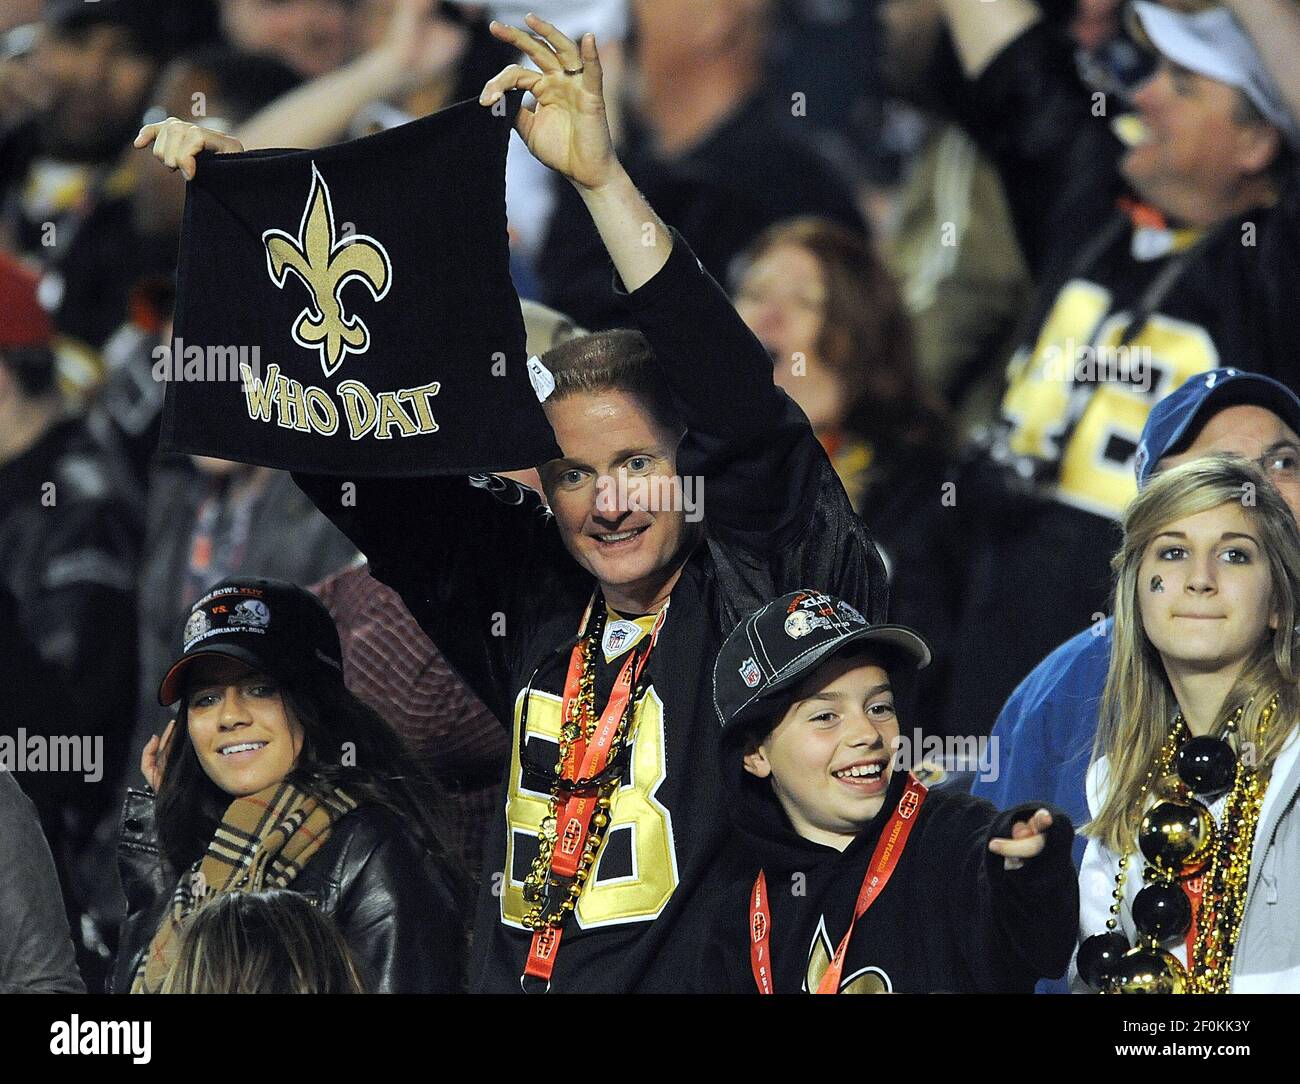 Saints fans hold up the Who Dat flag as the New Orleans Saints beat the  Indianapolis Colts 31-17, Sunday, February 7, 2010 in Super Bowl XLIV at  Sun Life Stadium in Miami